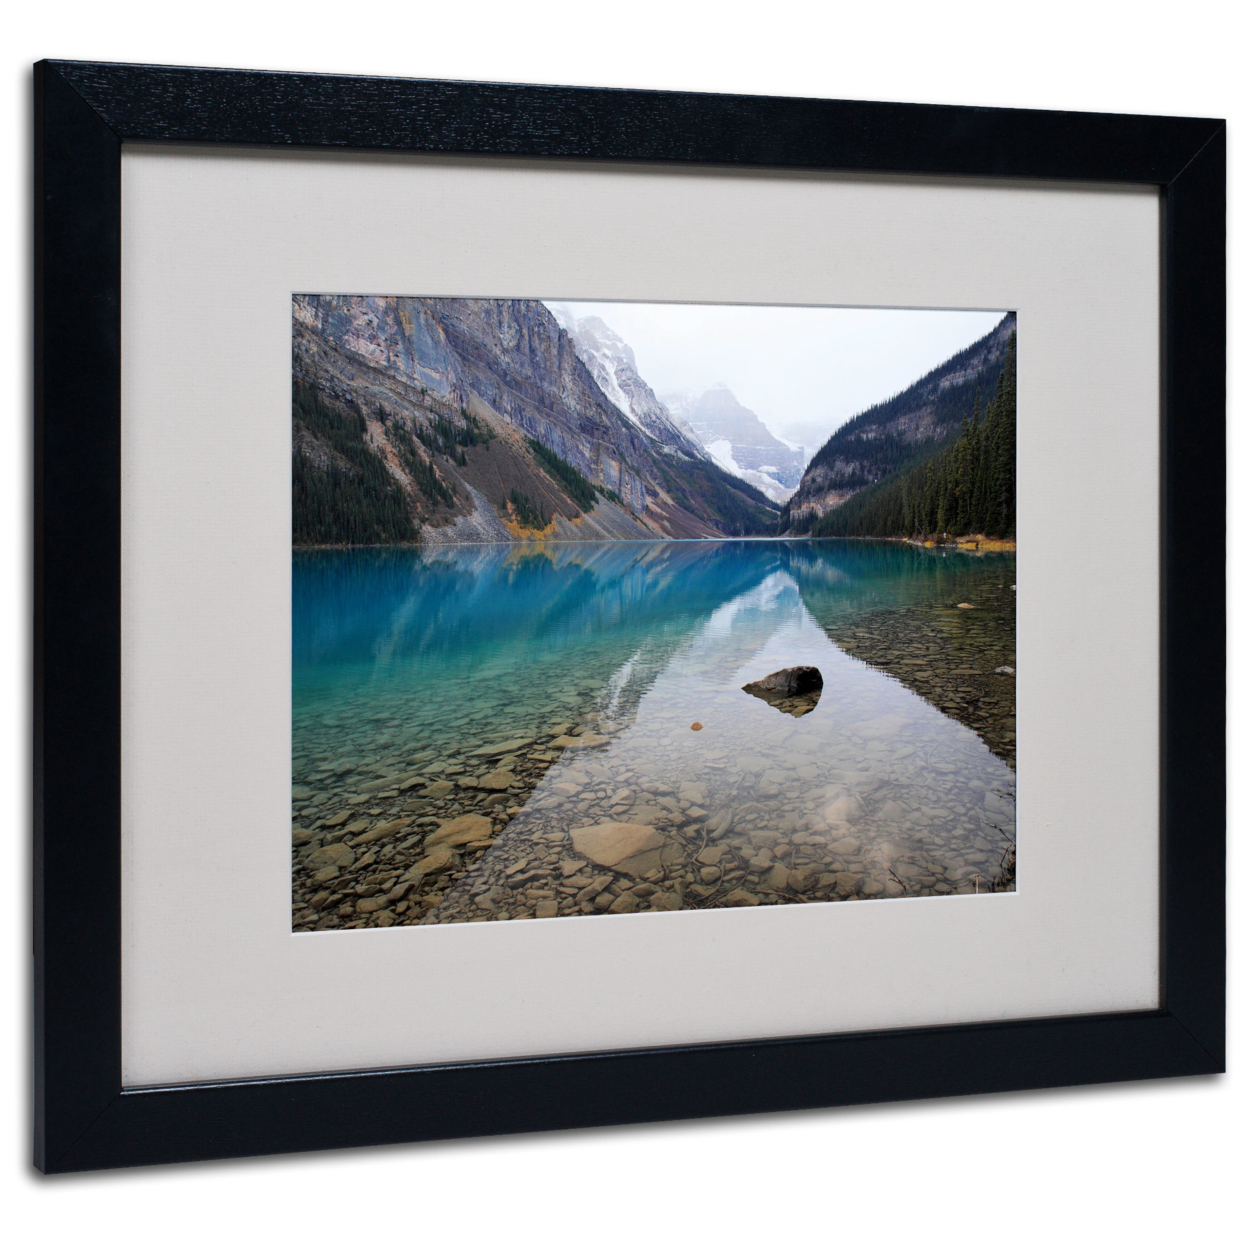 Pierre Leclerc 'Lake Louise' Black Wooden Framed Art 18 X 22 Inches